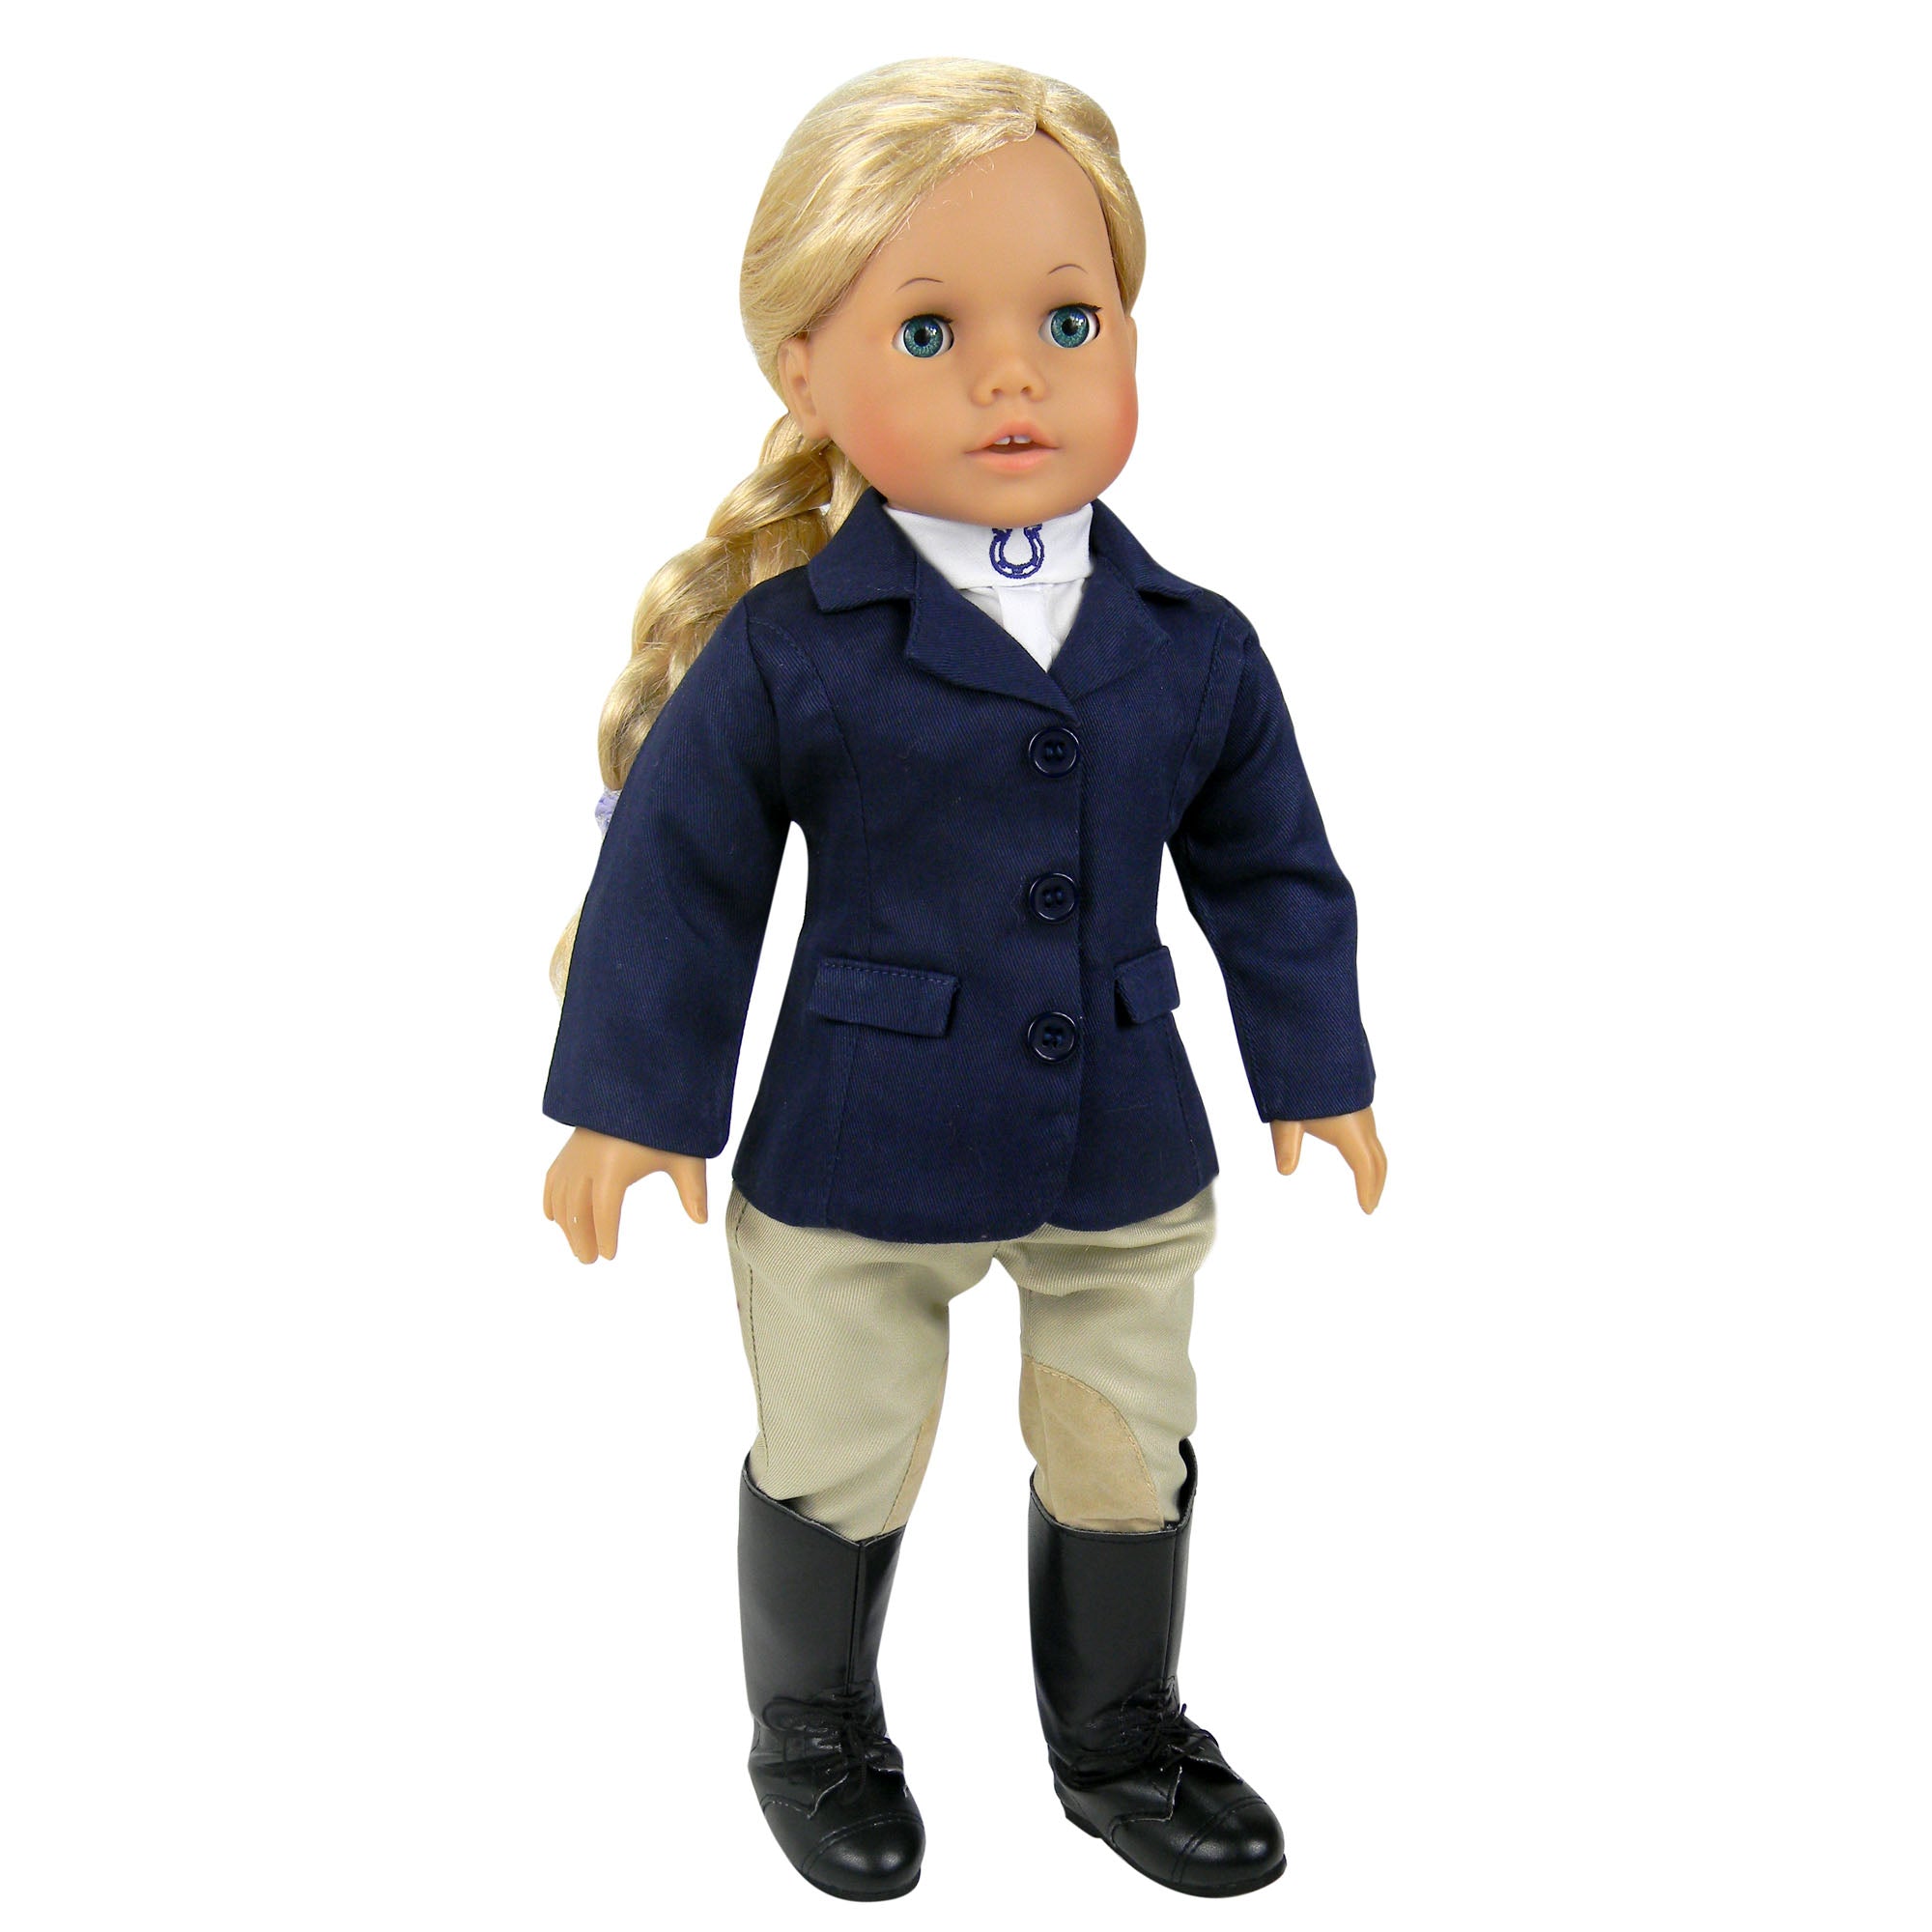 Sophia's - 18" Doll - Riding Outfit Navy Jacket, Breeches & Dickie Blouse Set - Navy